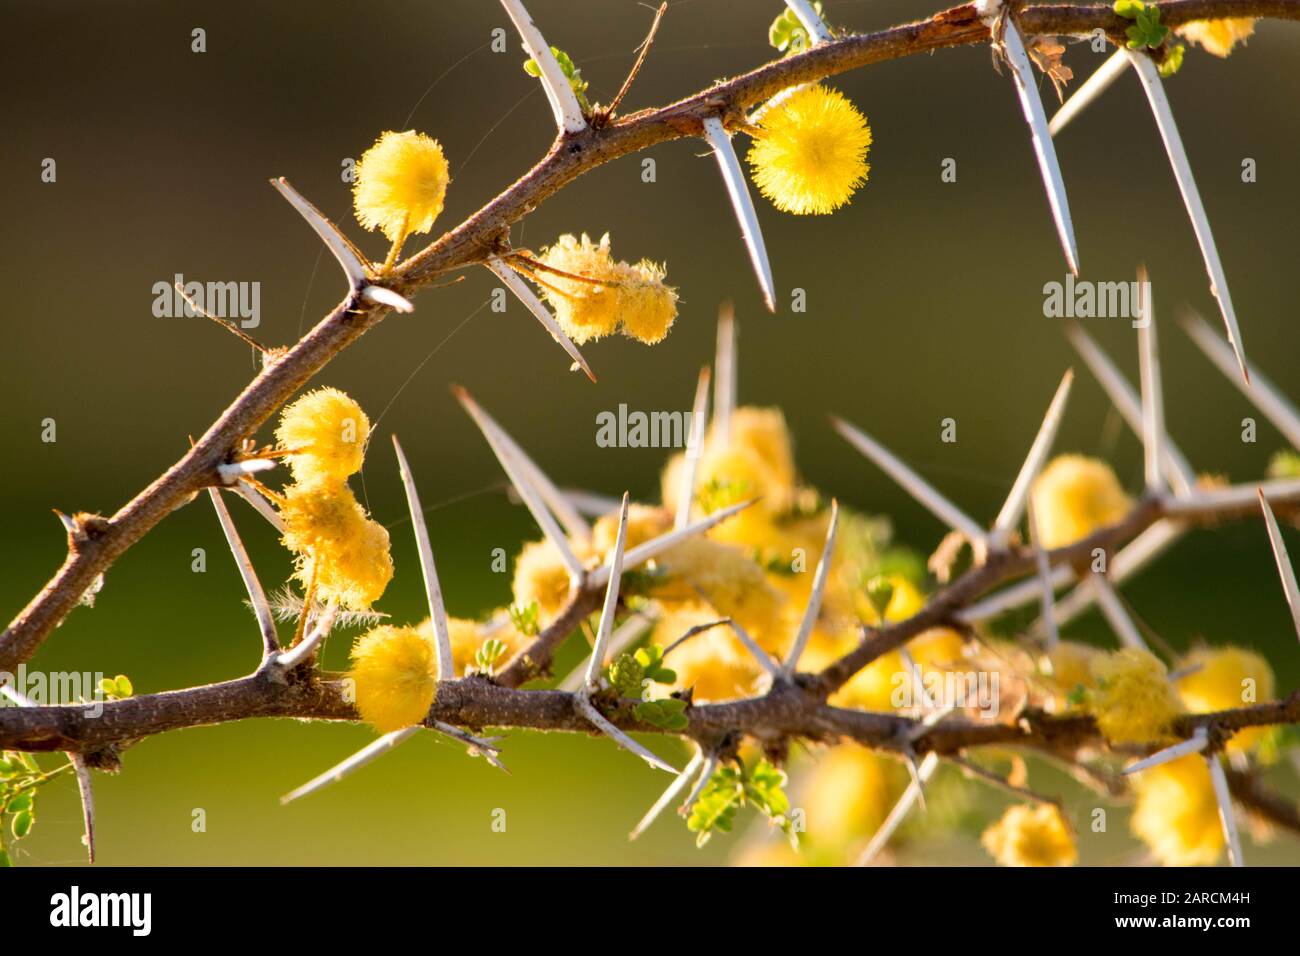 Yellow little flowers on a mandrel spotted plant during a bush safari in namibia, africa Stock Photo